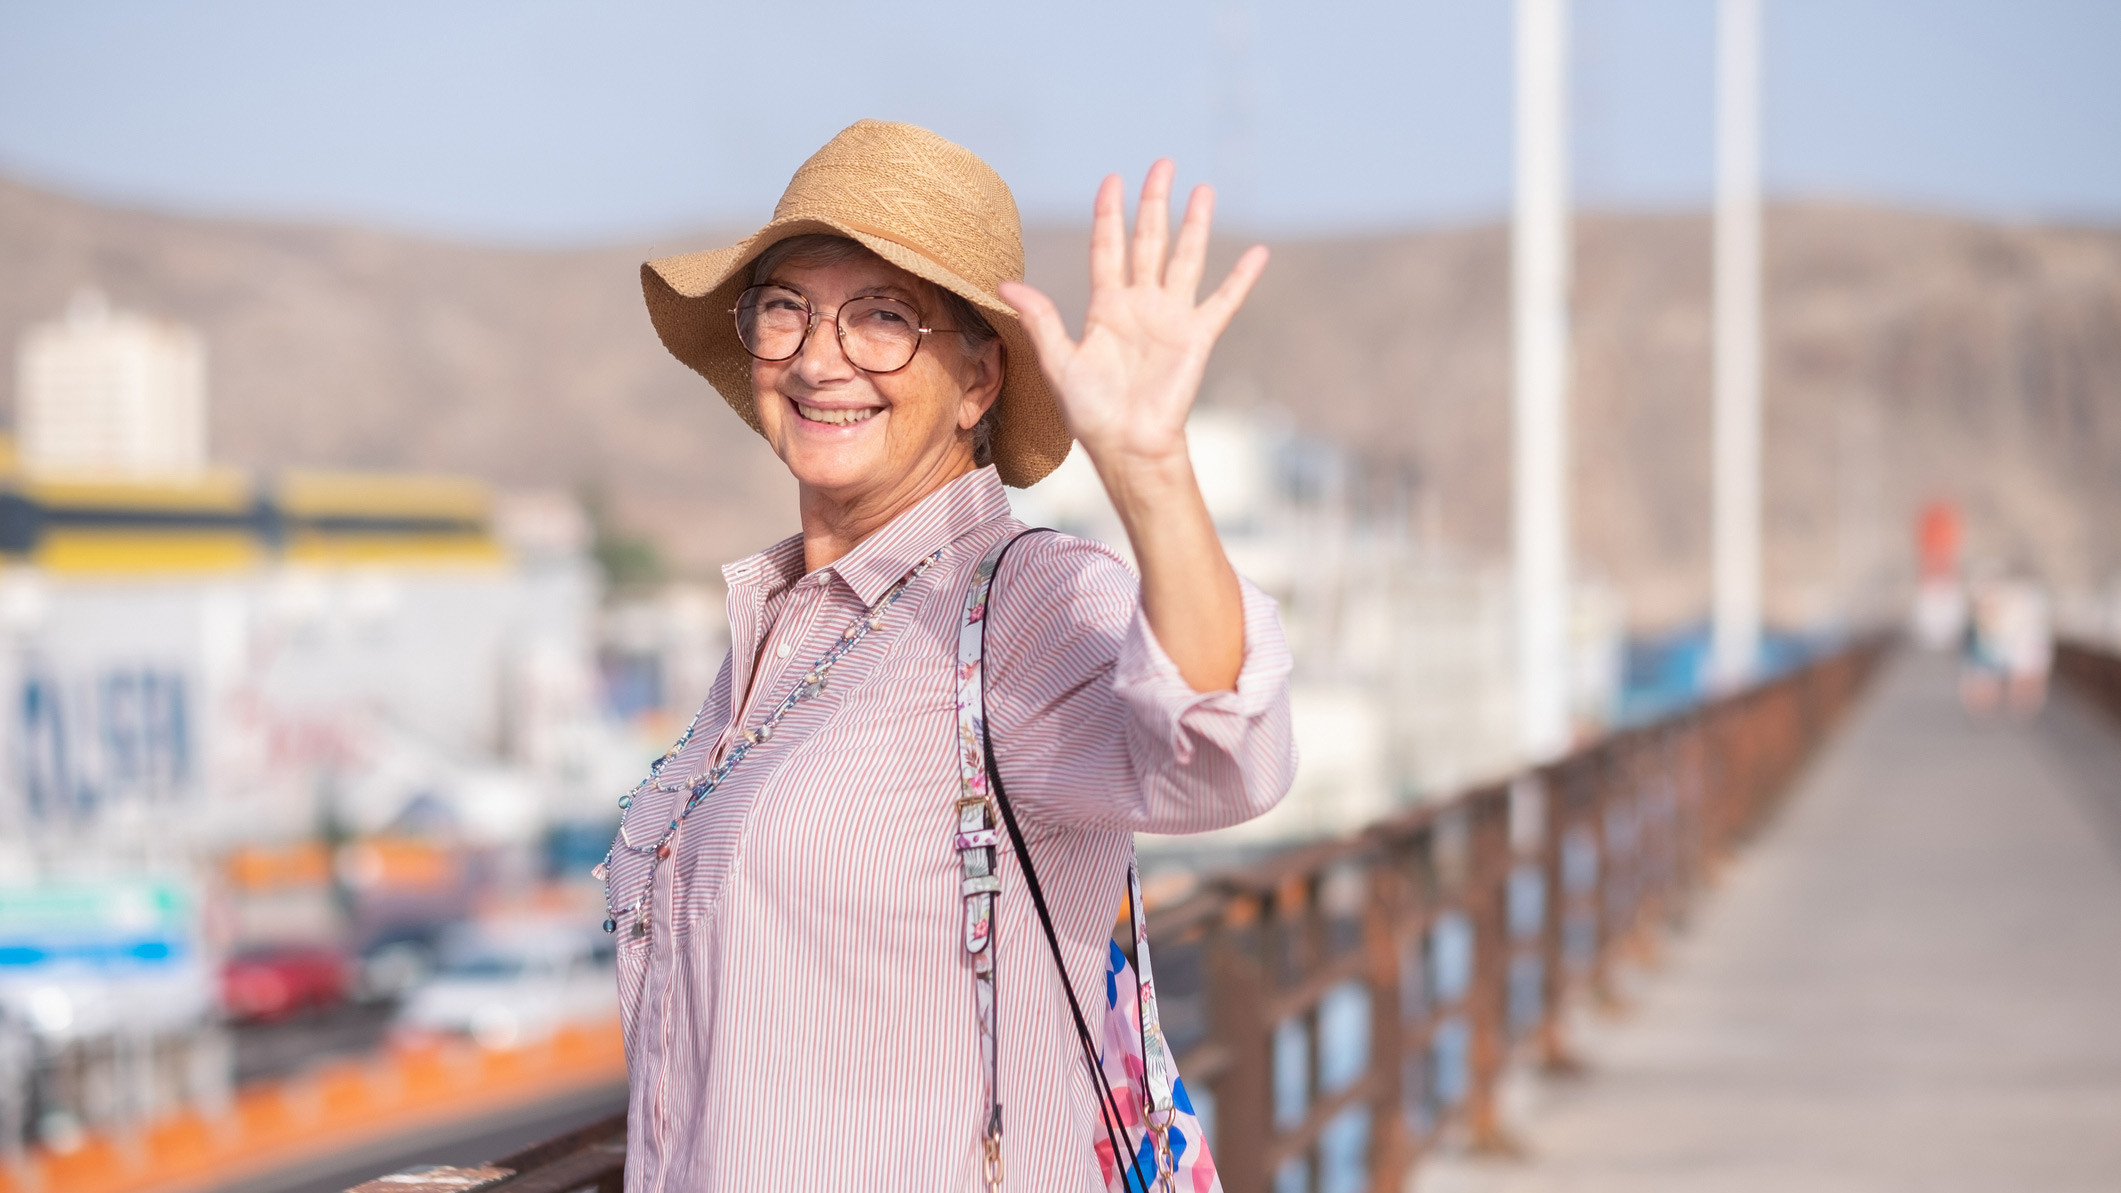 cristwood-local-attractions---active-elderly-woman-at-ferry-1678383585.jpg